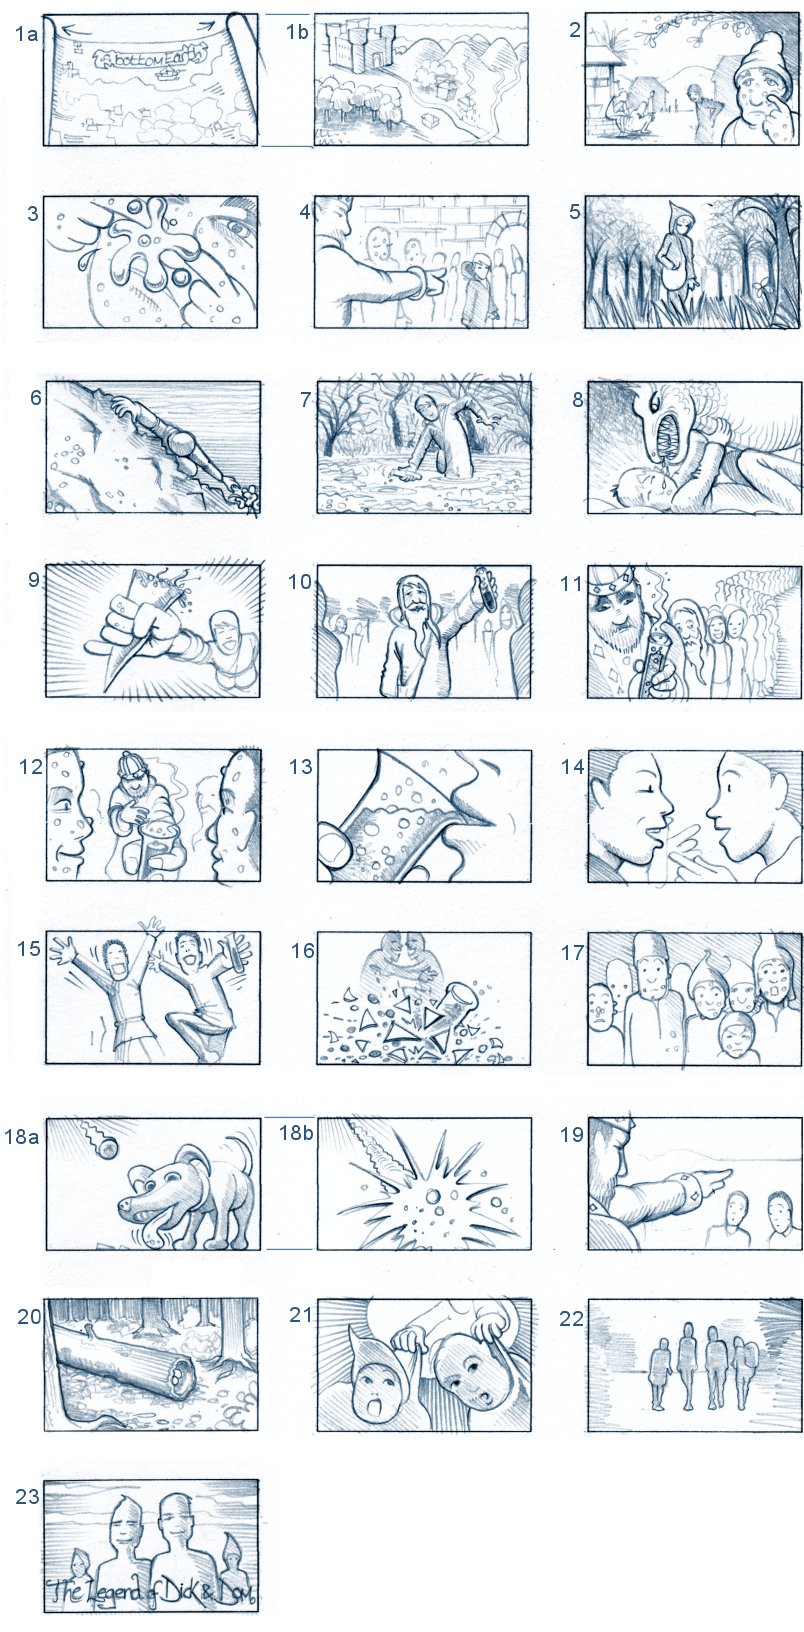 DICK & DOM'S OPENING SEQUENCE STORYBOARD BY ANDY SPARROW